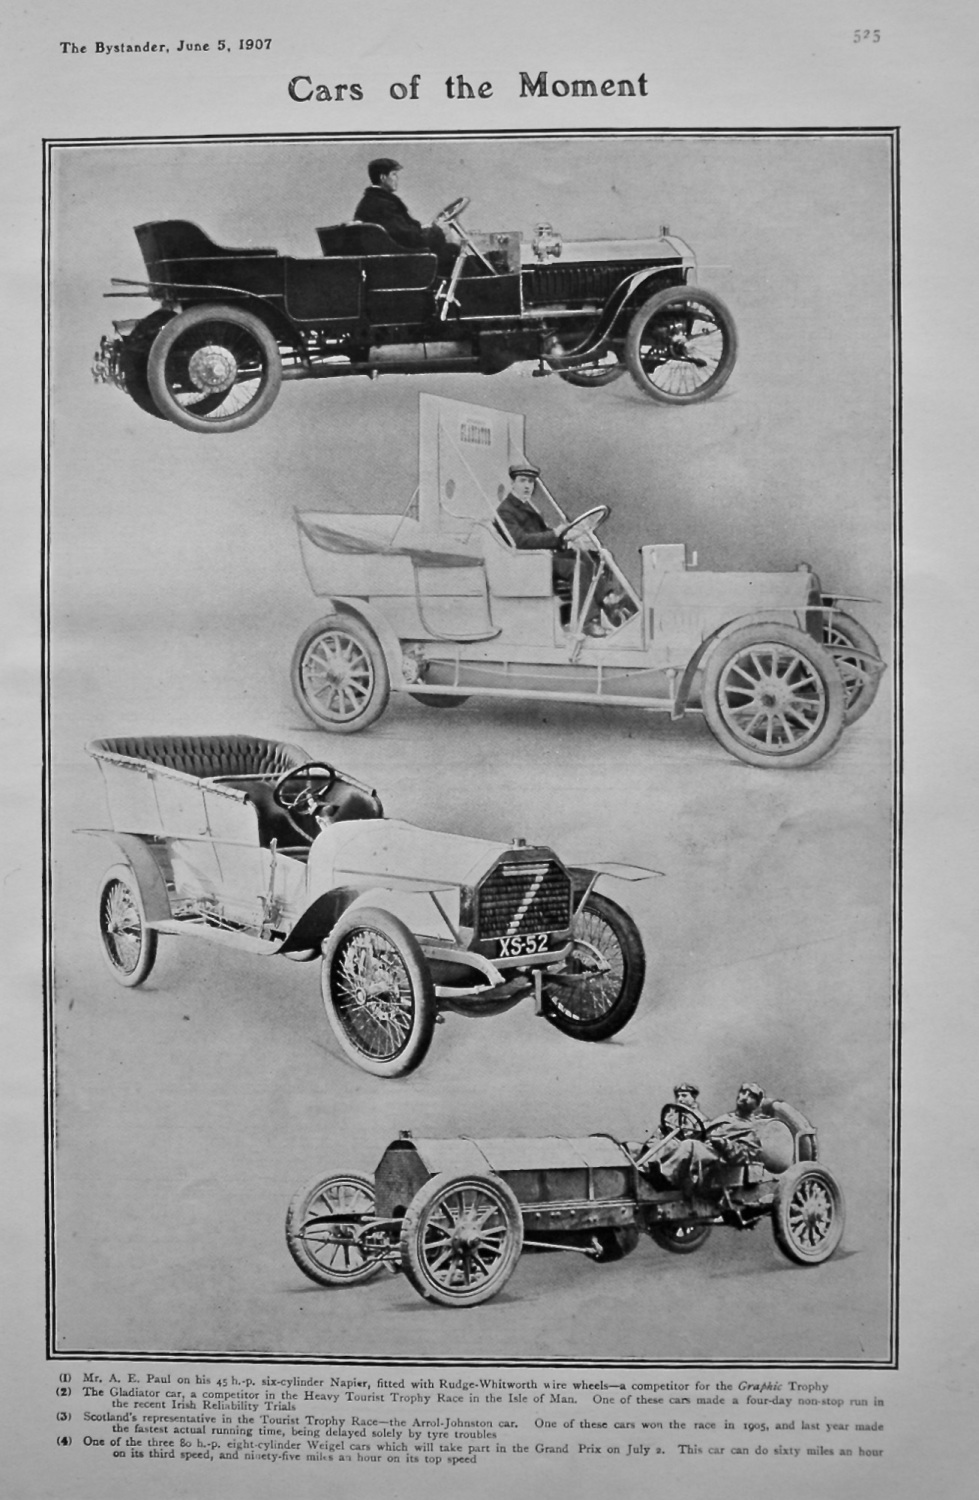 Cars of the Moment. 1907.